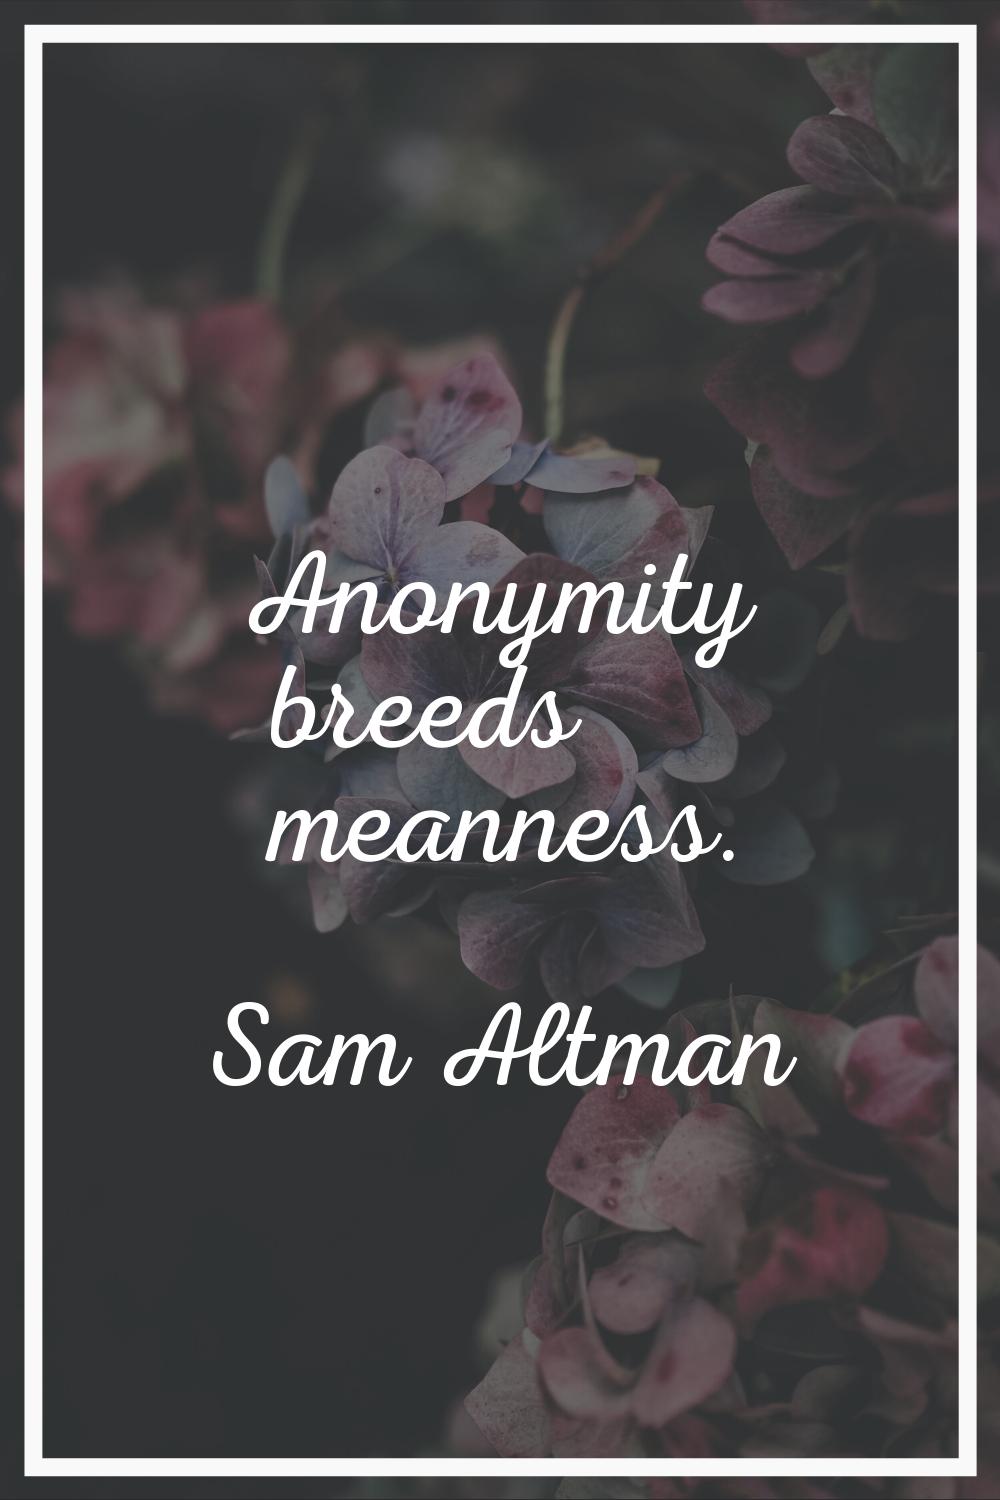 Anonymity breeds meanness.